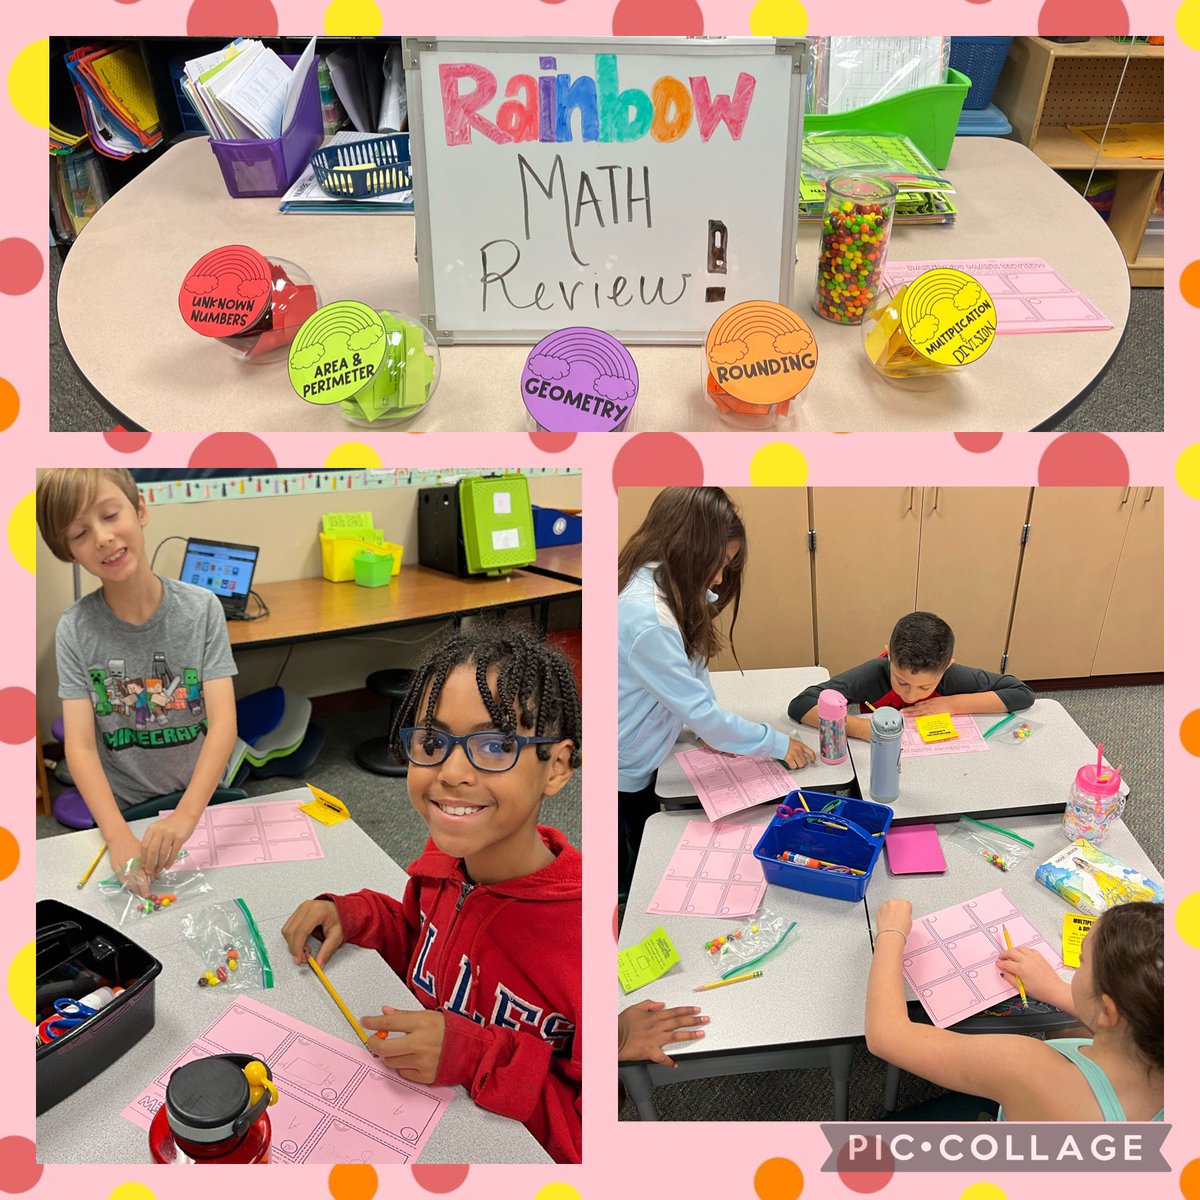 Our Skittle Rainbow Review was a hit. A creative and engaging way to review our math skills. Thanks for sharing @MsKnox_ESE !!!
@HumbleISD_ESE 
#eseSOAR